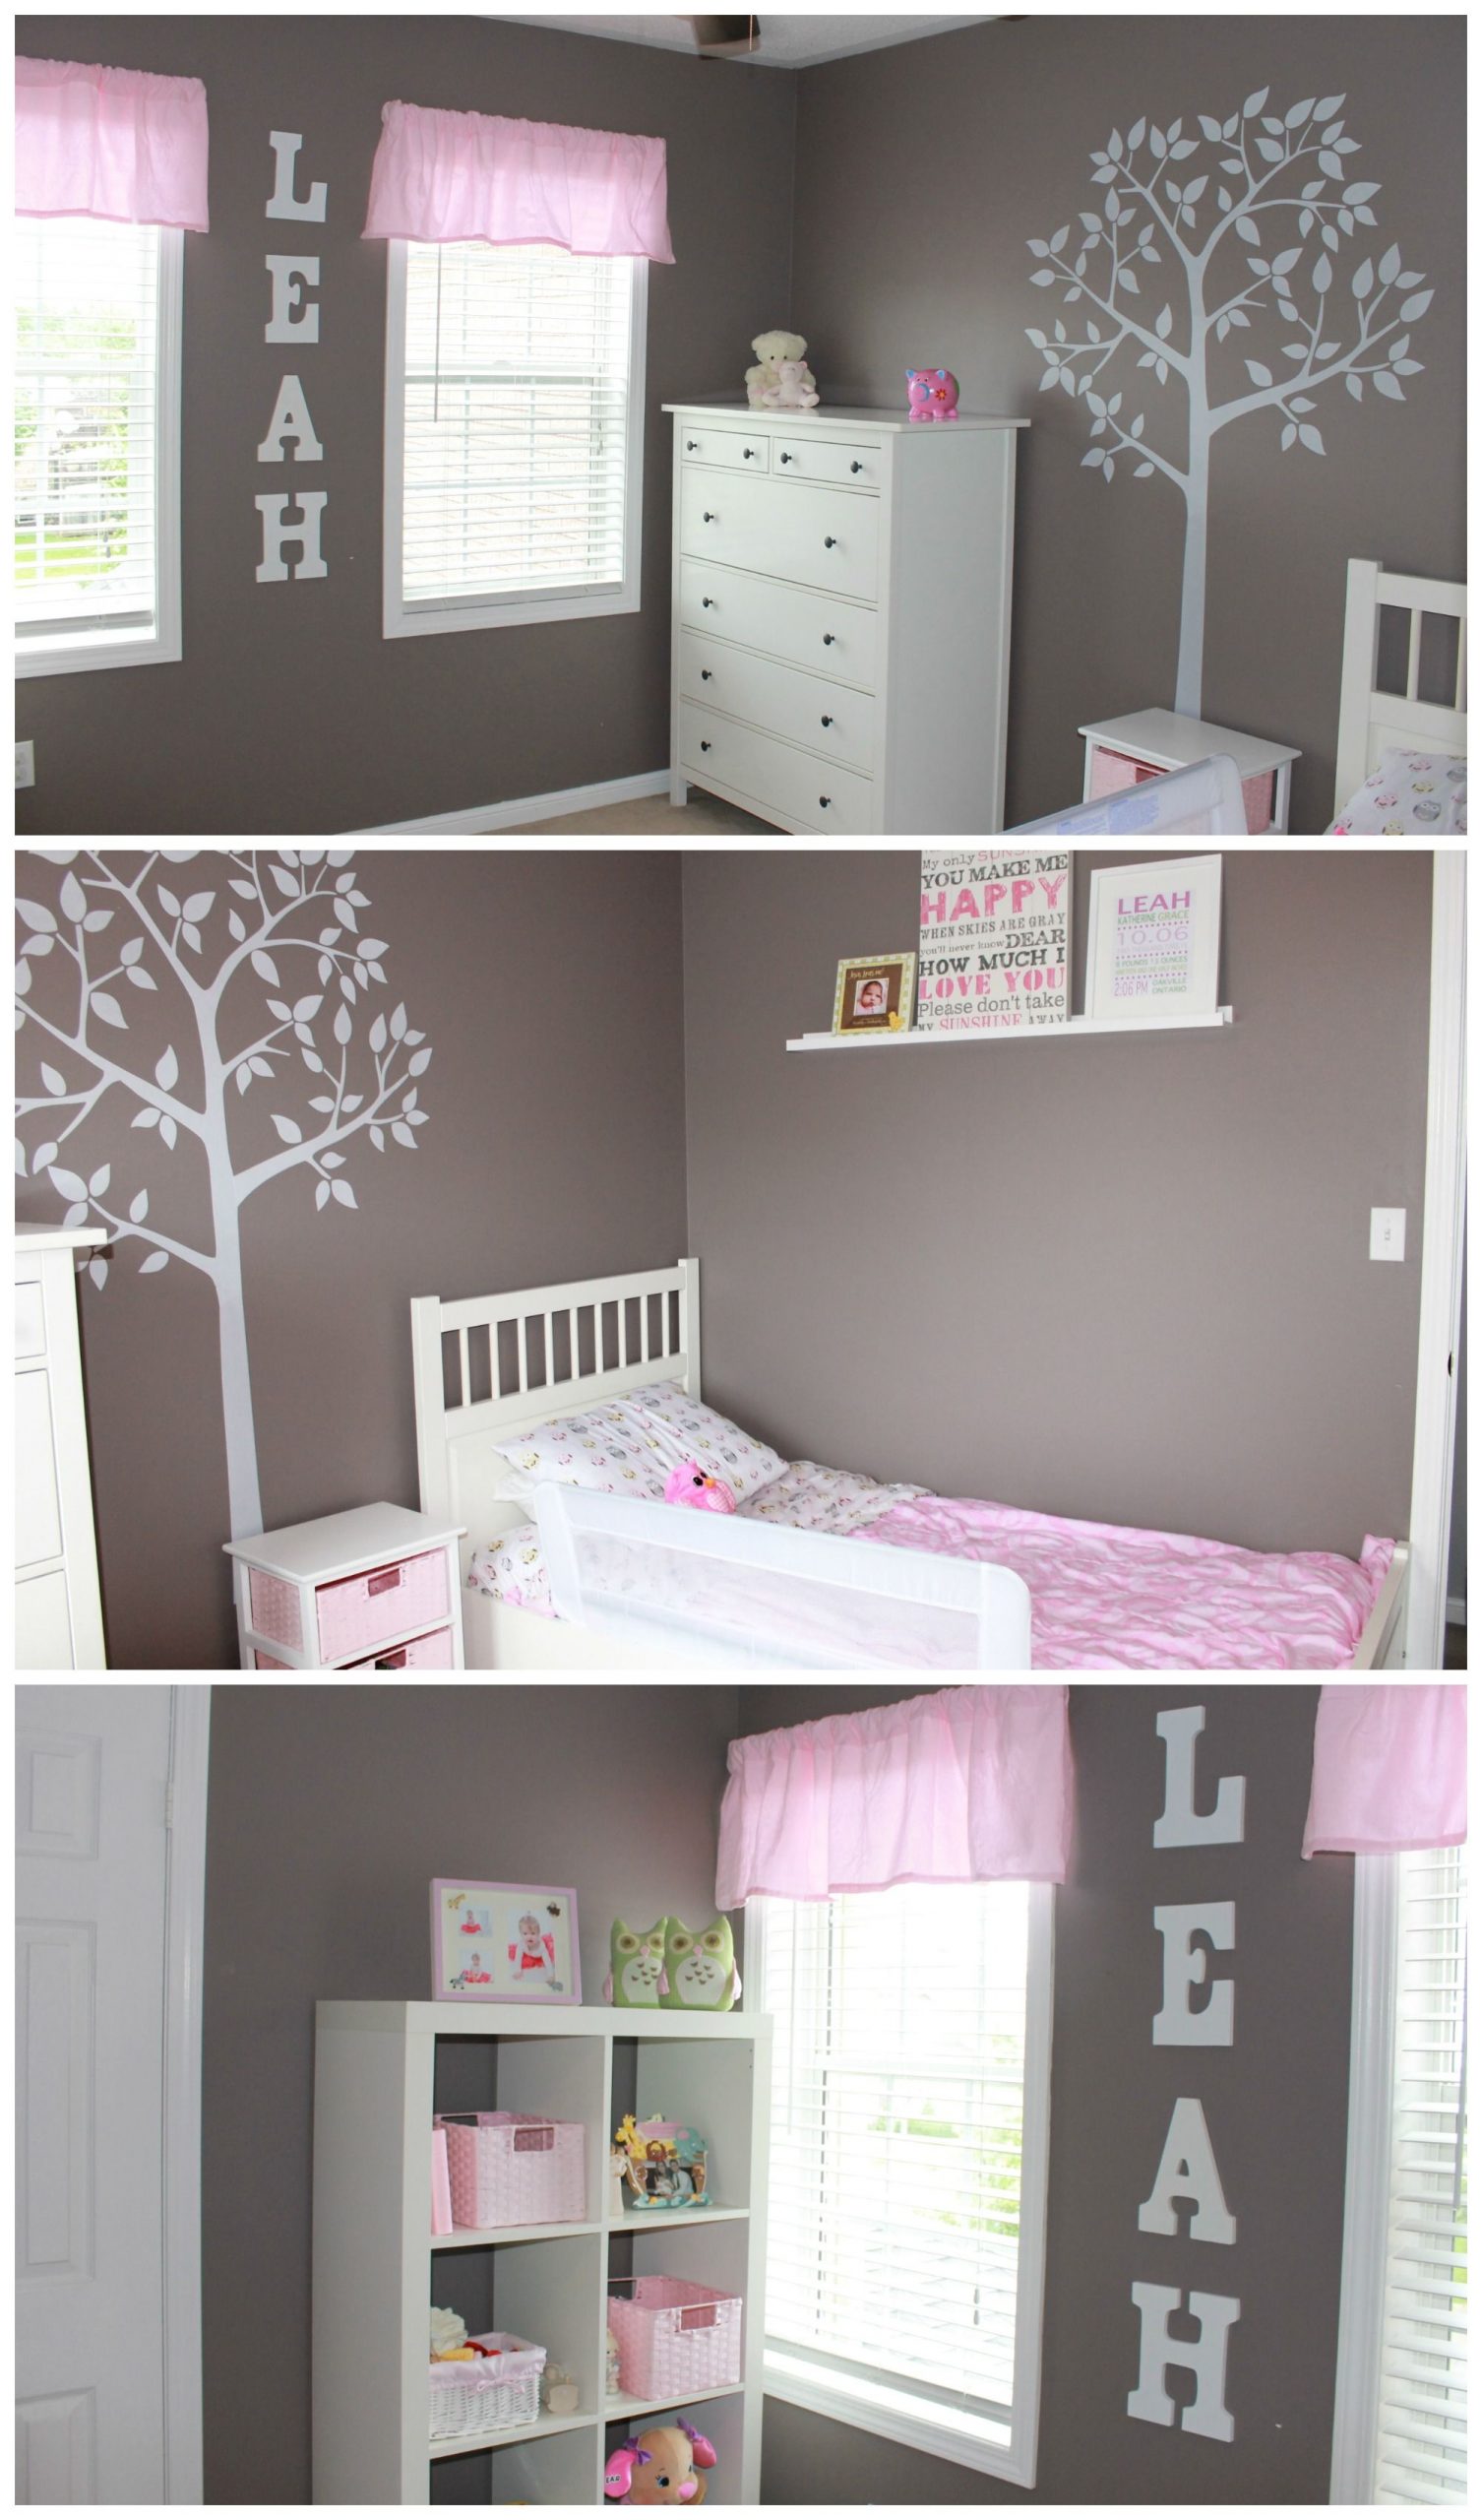 Toddler Girl Room Ideas On A Budget: Best Ideas